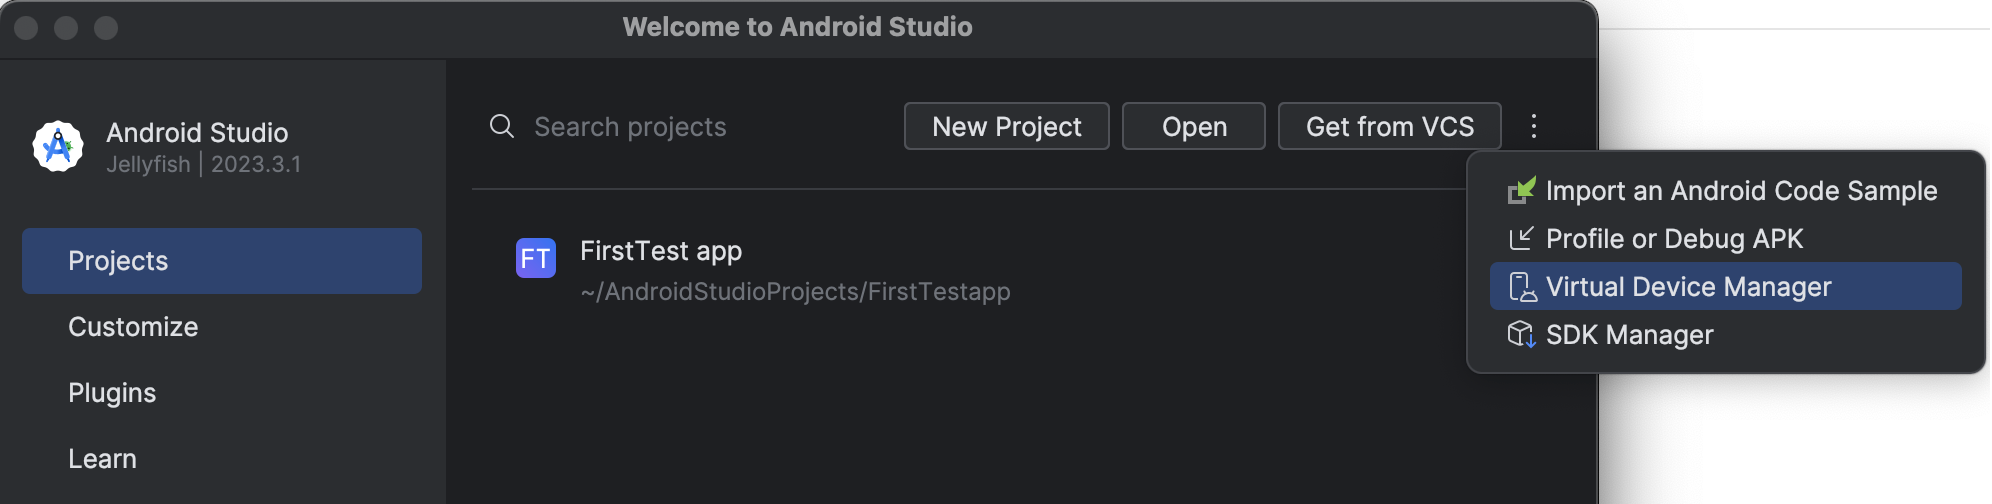 Android Studio: More Tools > click Virtual Device Manager